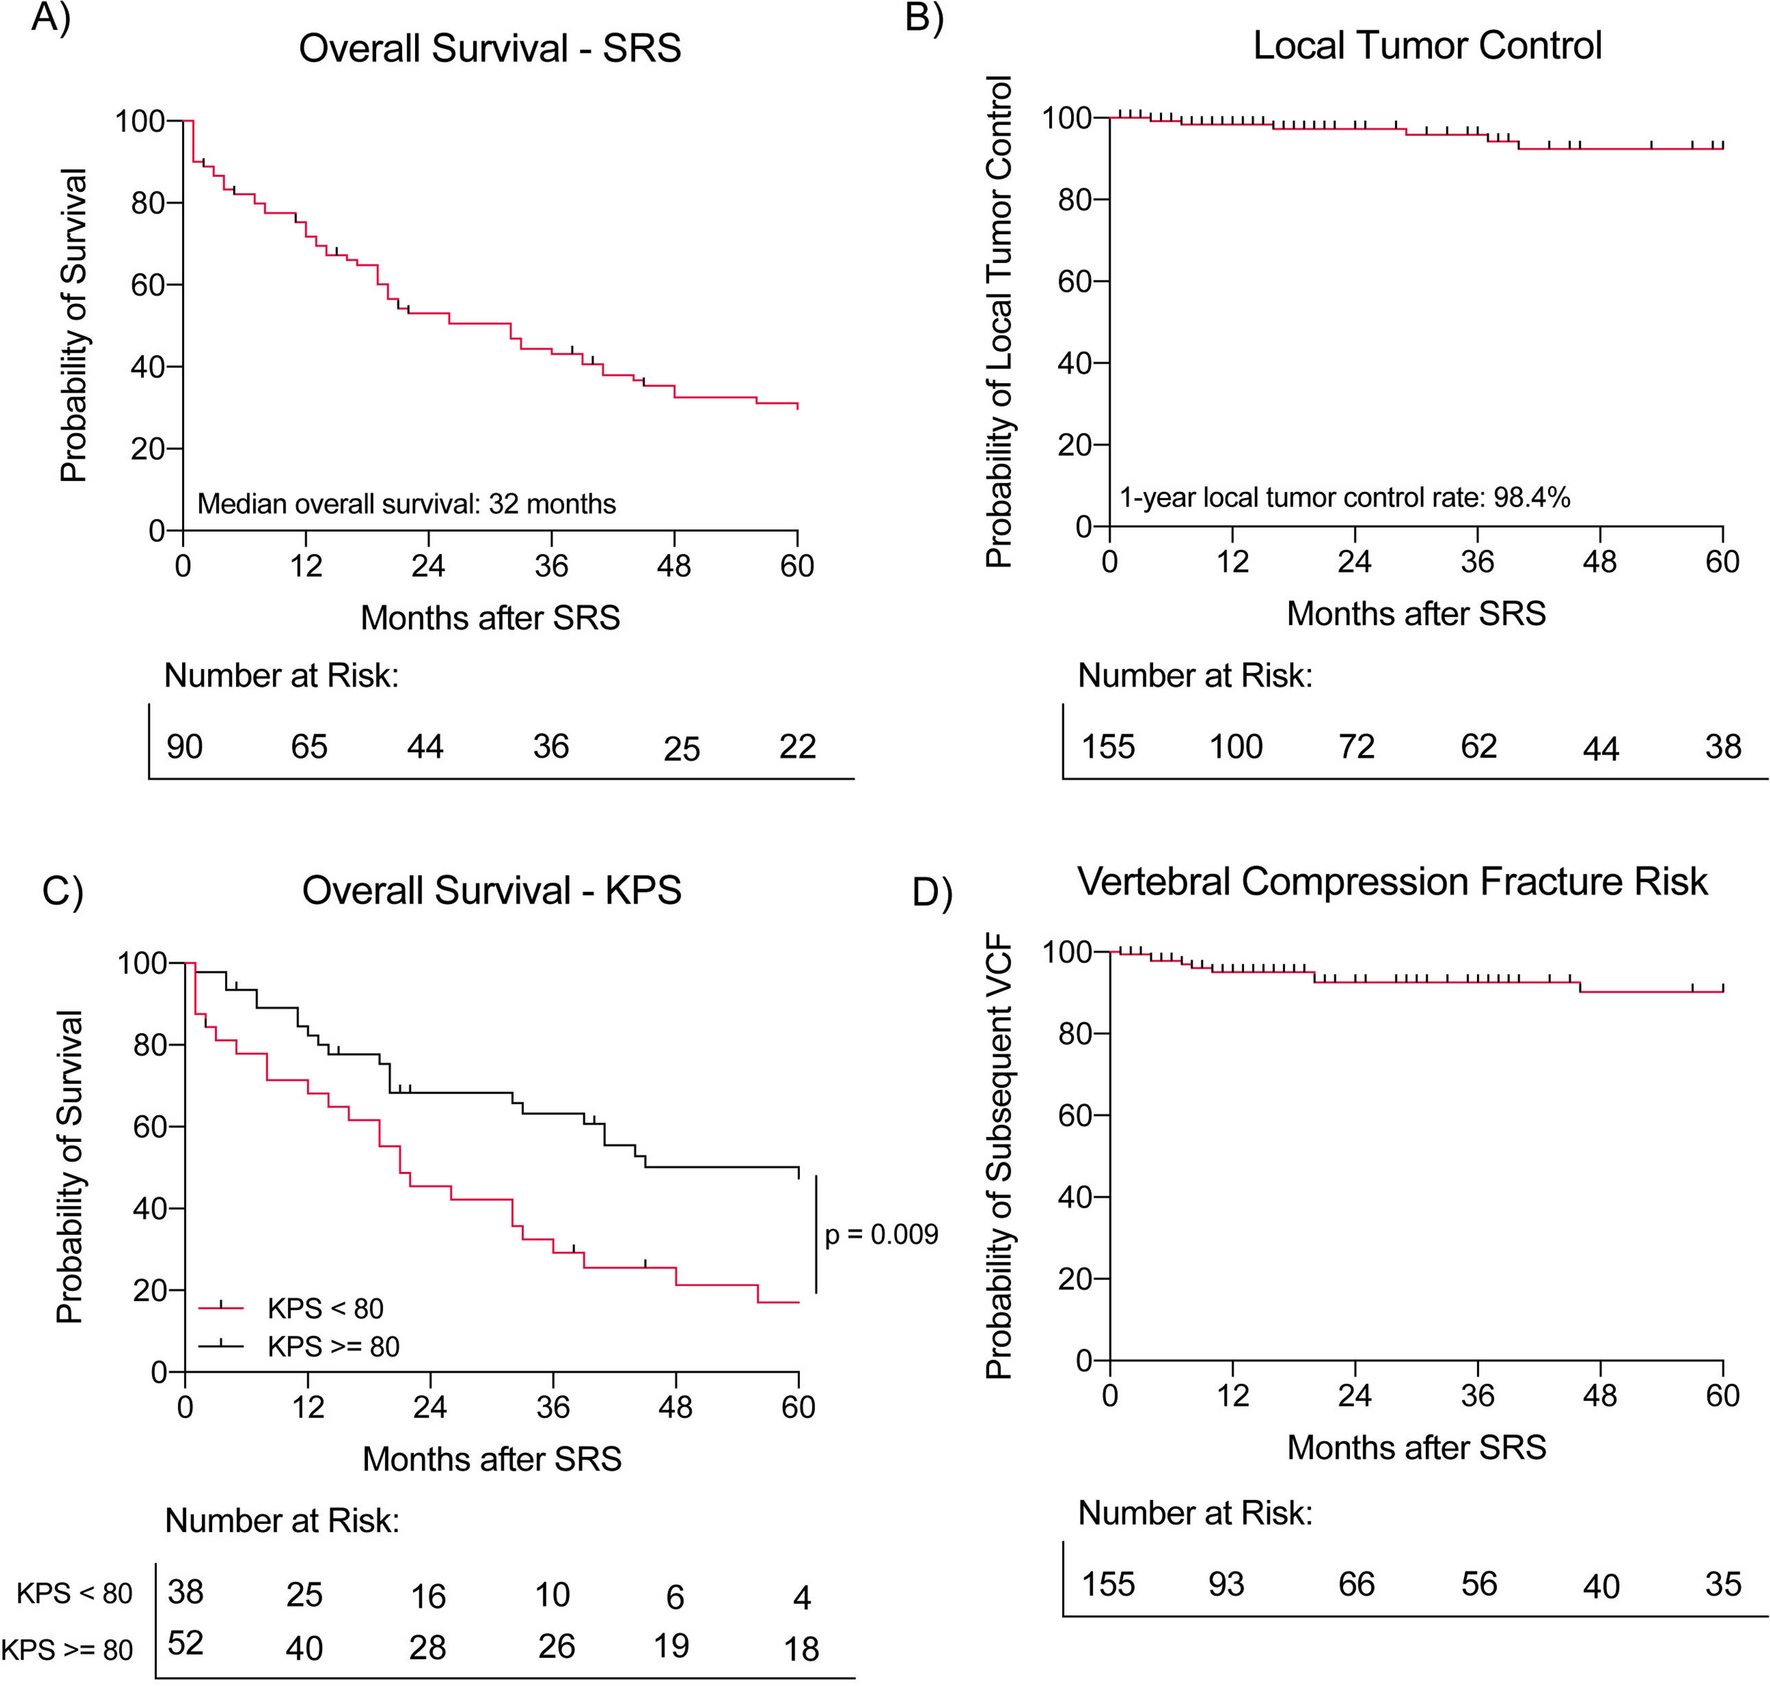 The role of spine stereotactic radiosurgery for patients with breast cancer metastases